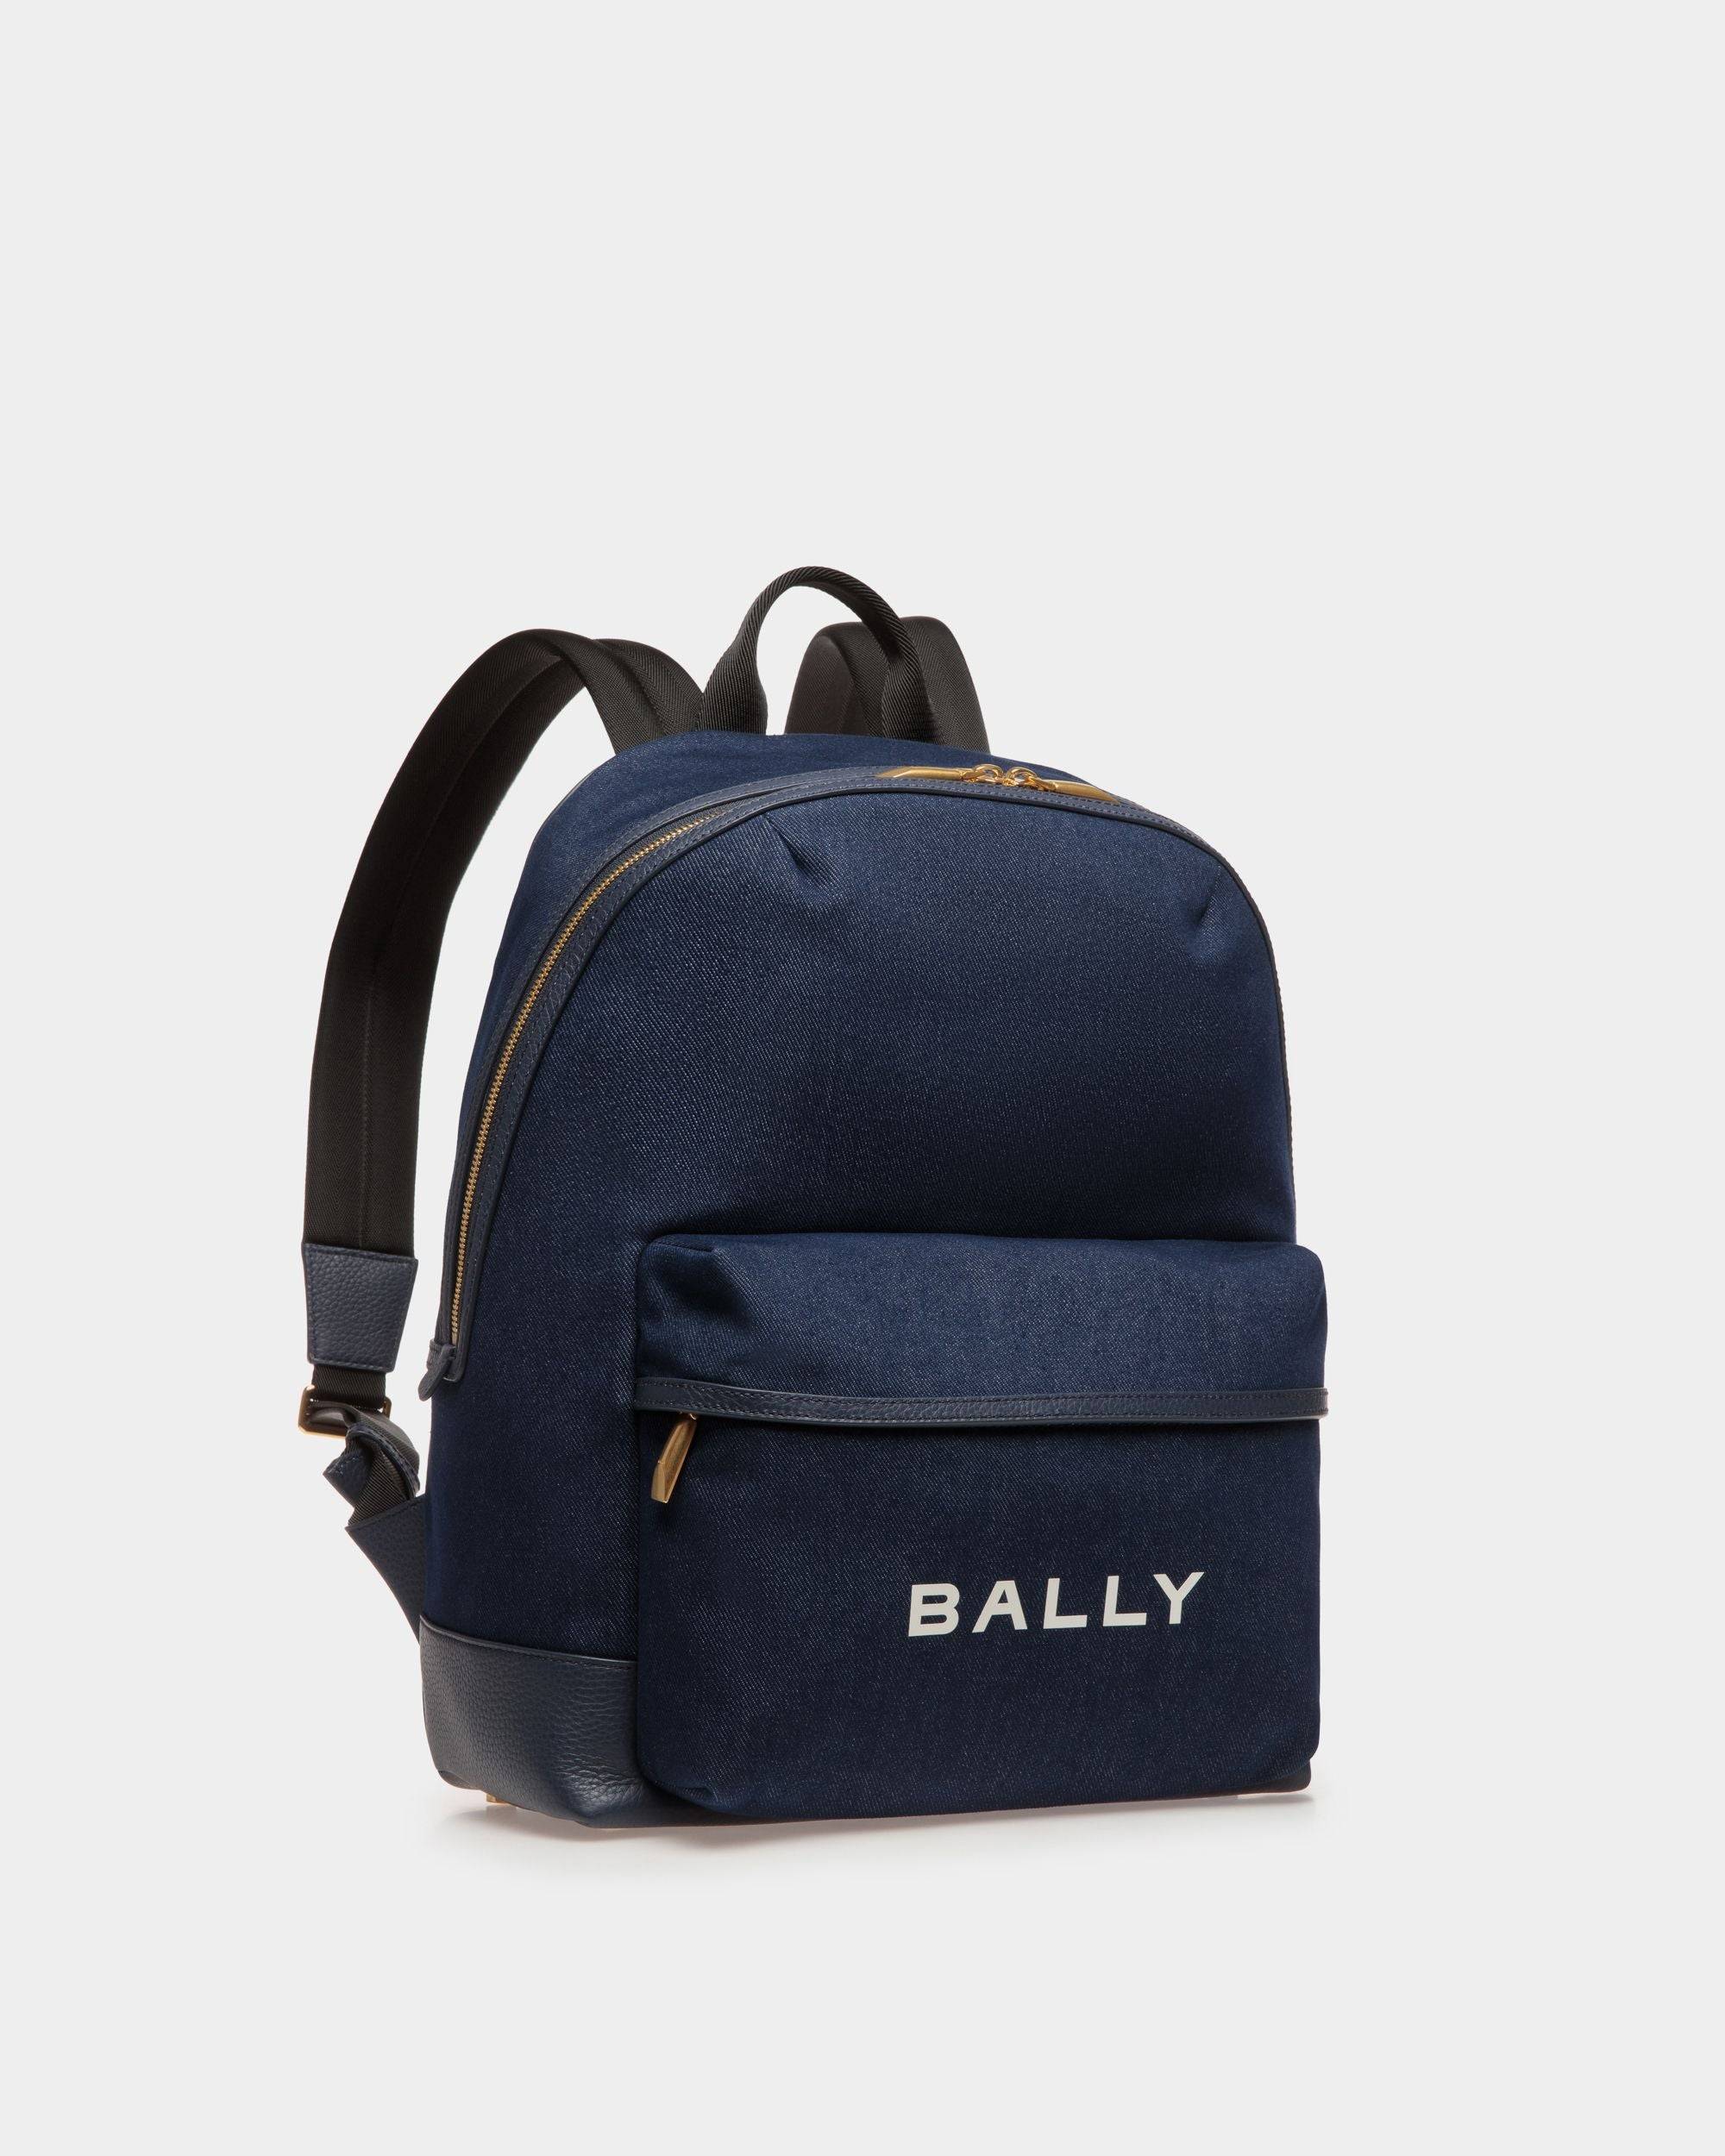 Bar | Men's Backpack in Blue Canvas And Leather | Bally | Still Life 3/4 Front